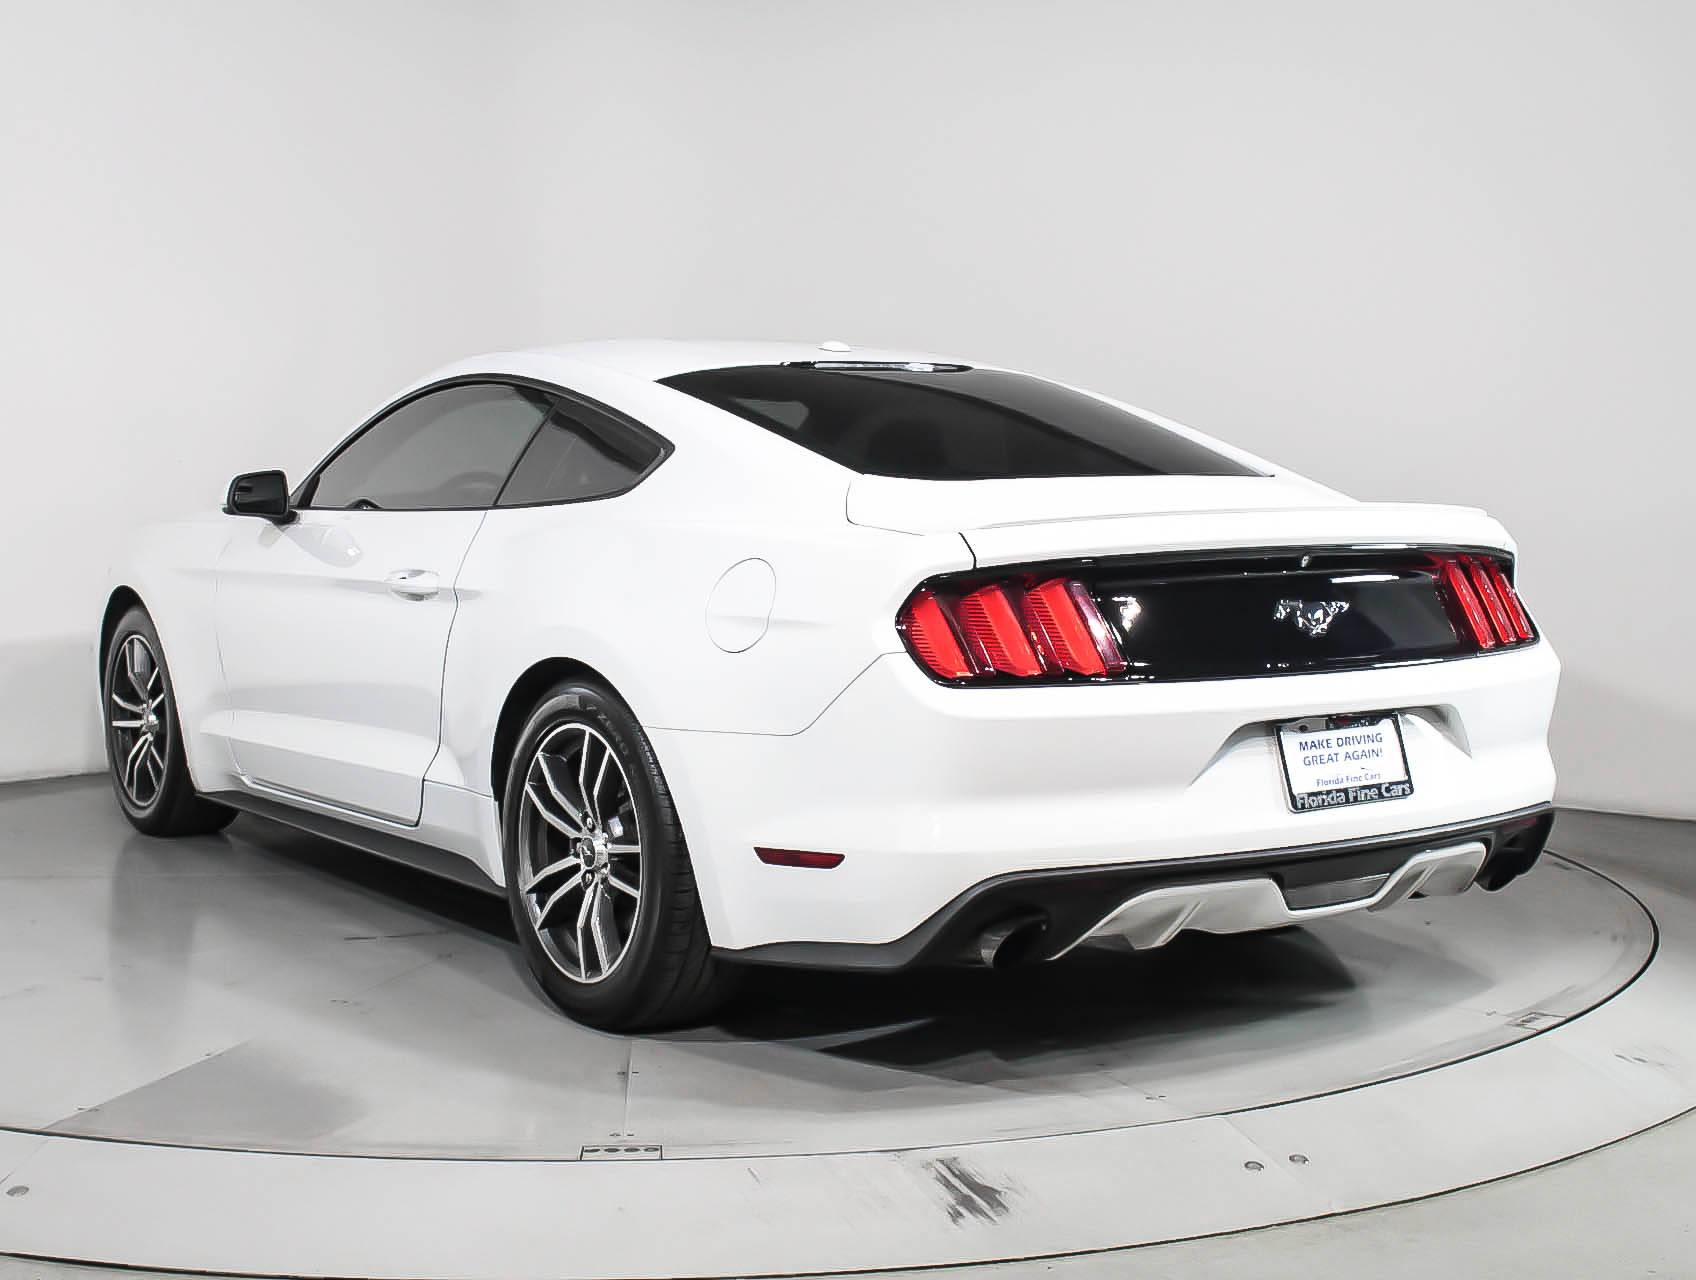 Florida Fine Cars - Used FORD MUSTANG 2015 MIAMI Ecoboost Premium